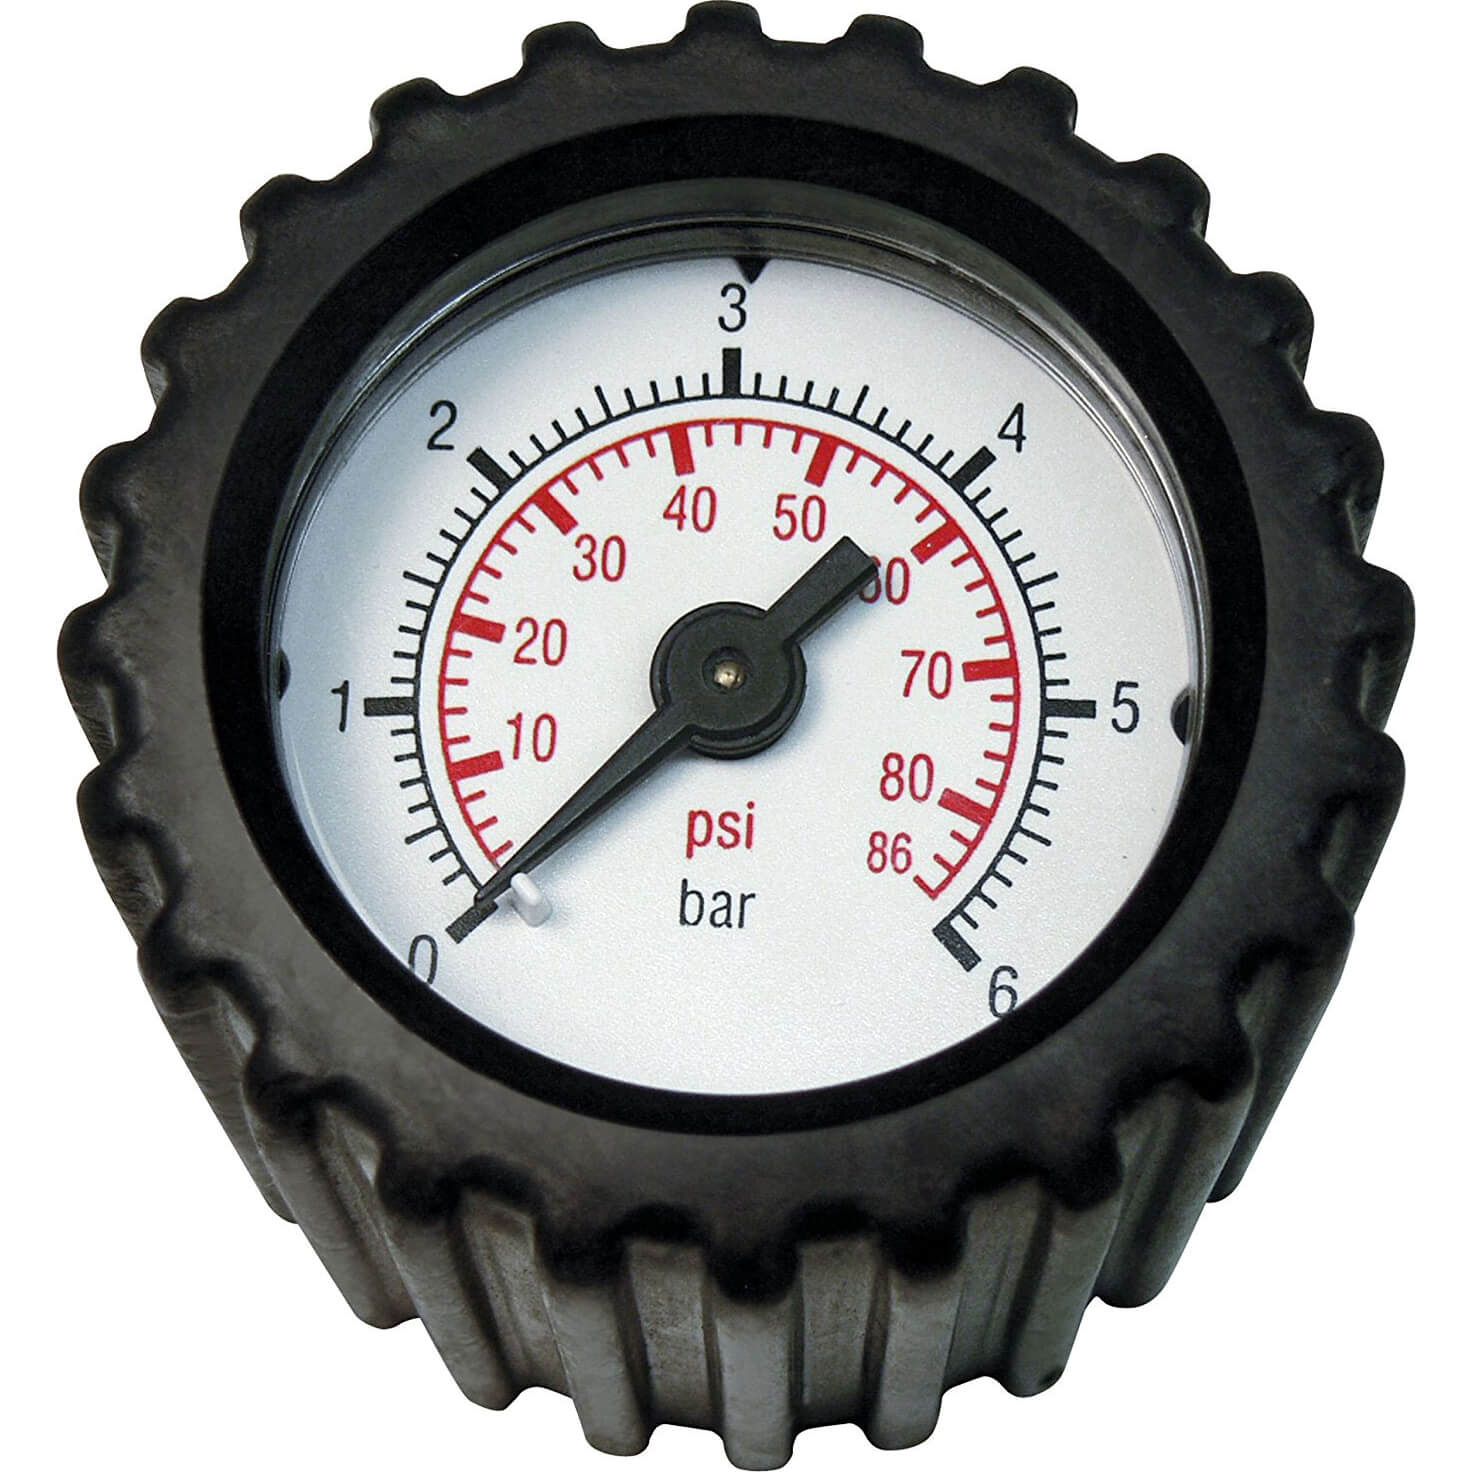 Image of Solo Pressure Control Gauge with Connection Fittings for Pressure Sprayers